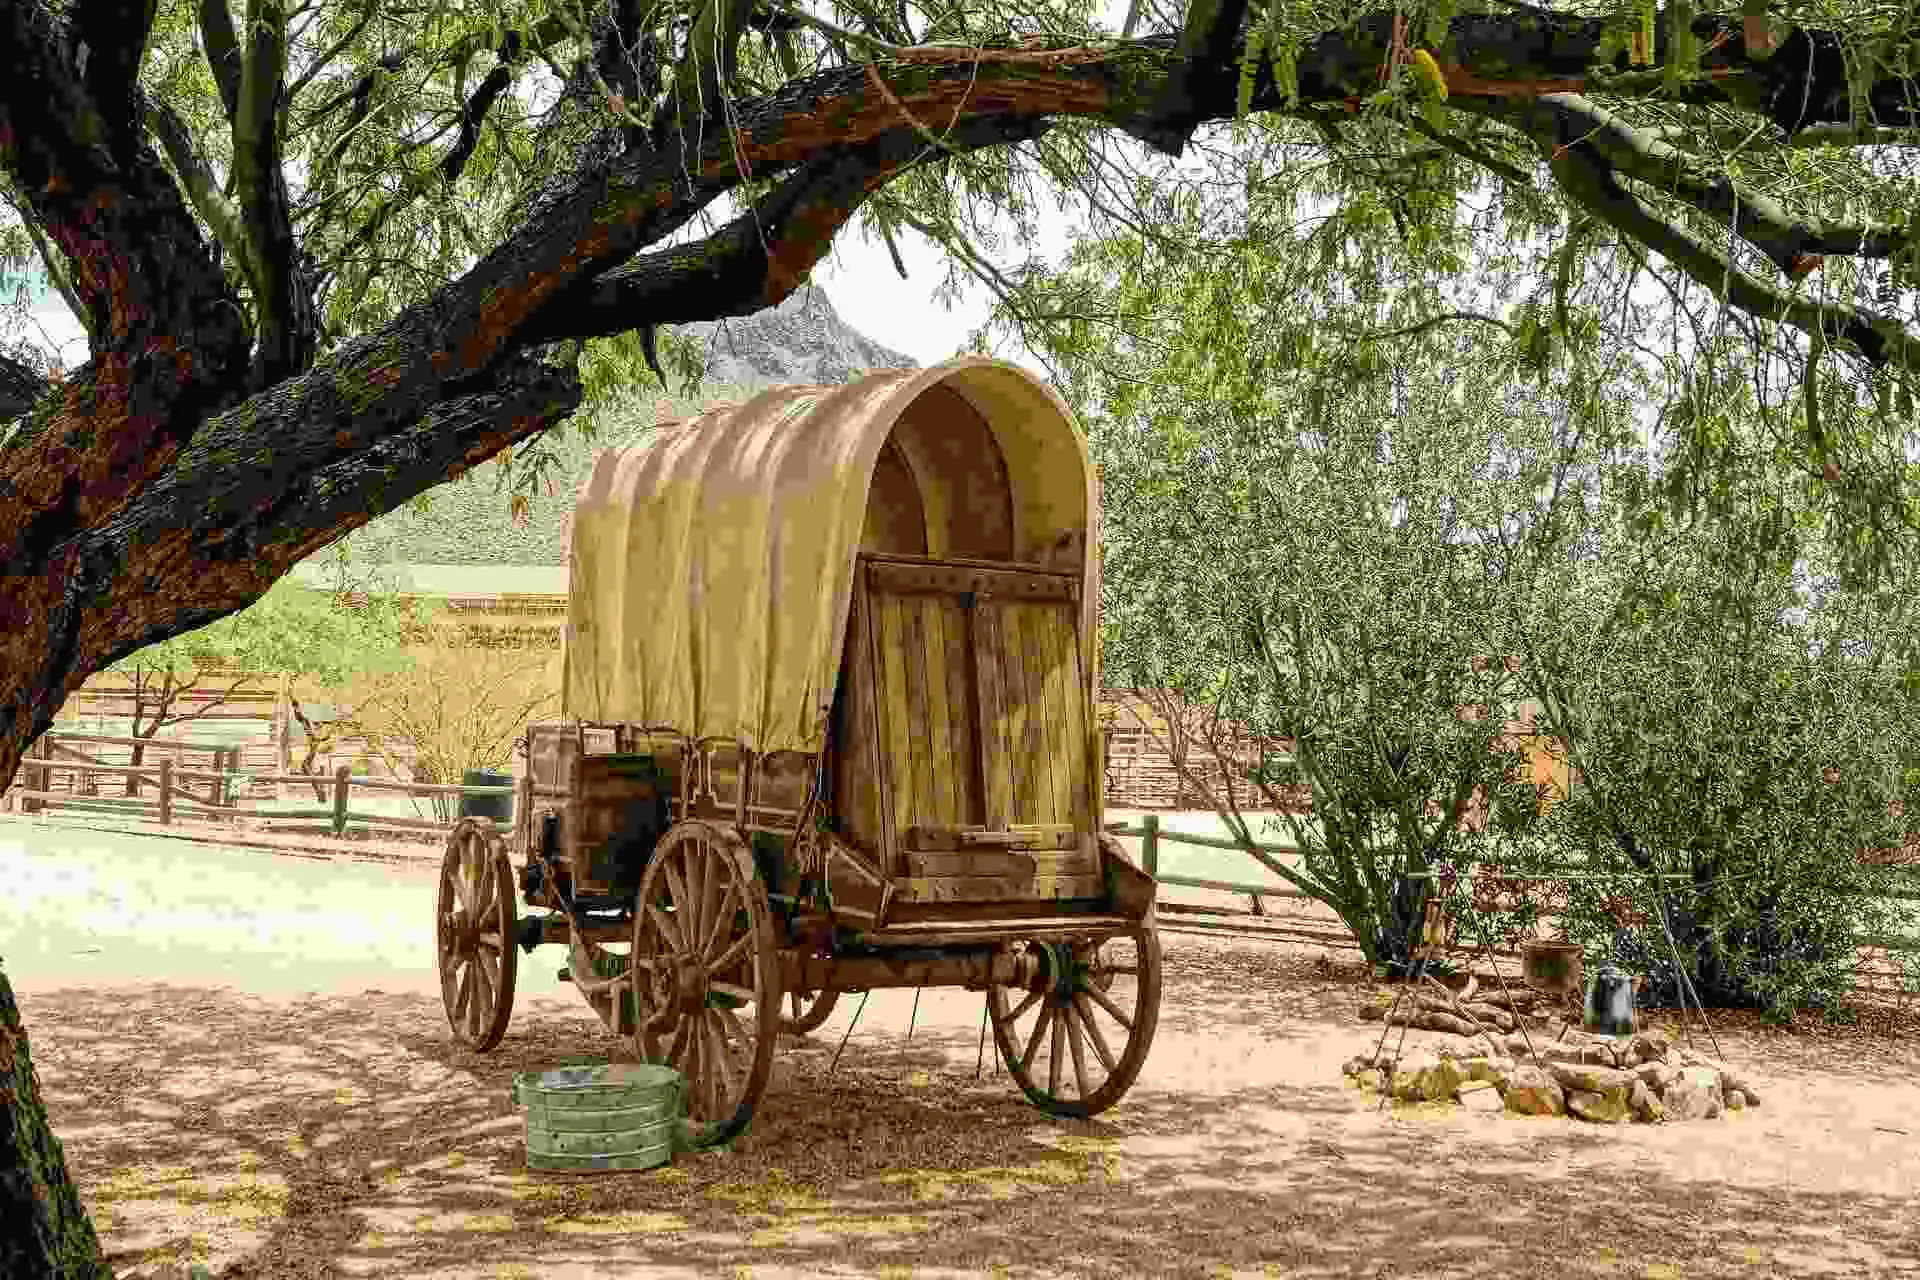 Wagon trains facts are useful to know as wagon trains were an important part of transportation history.